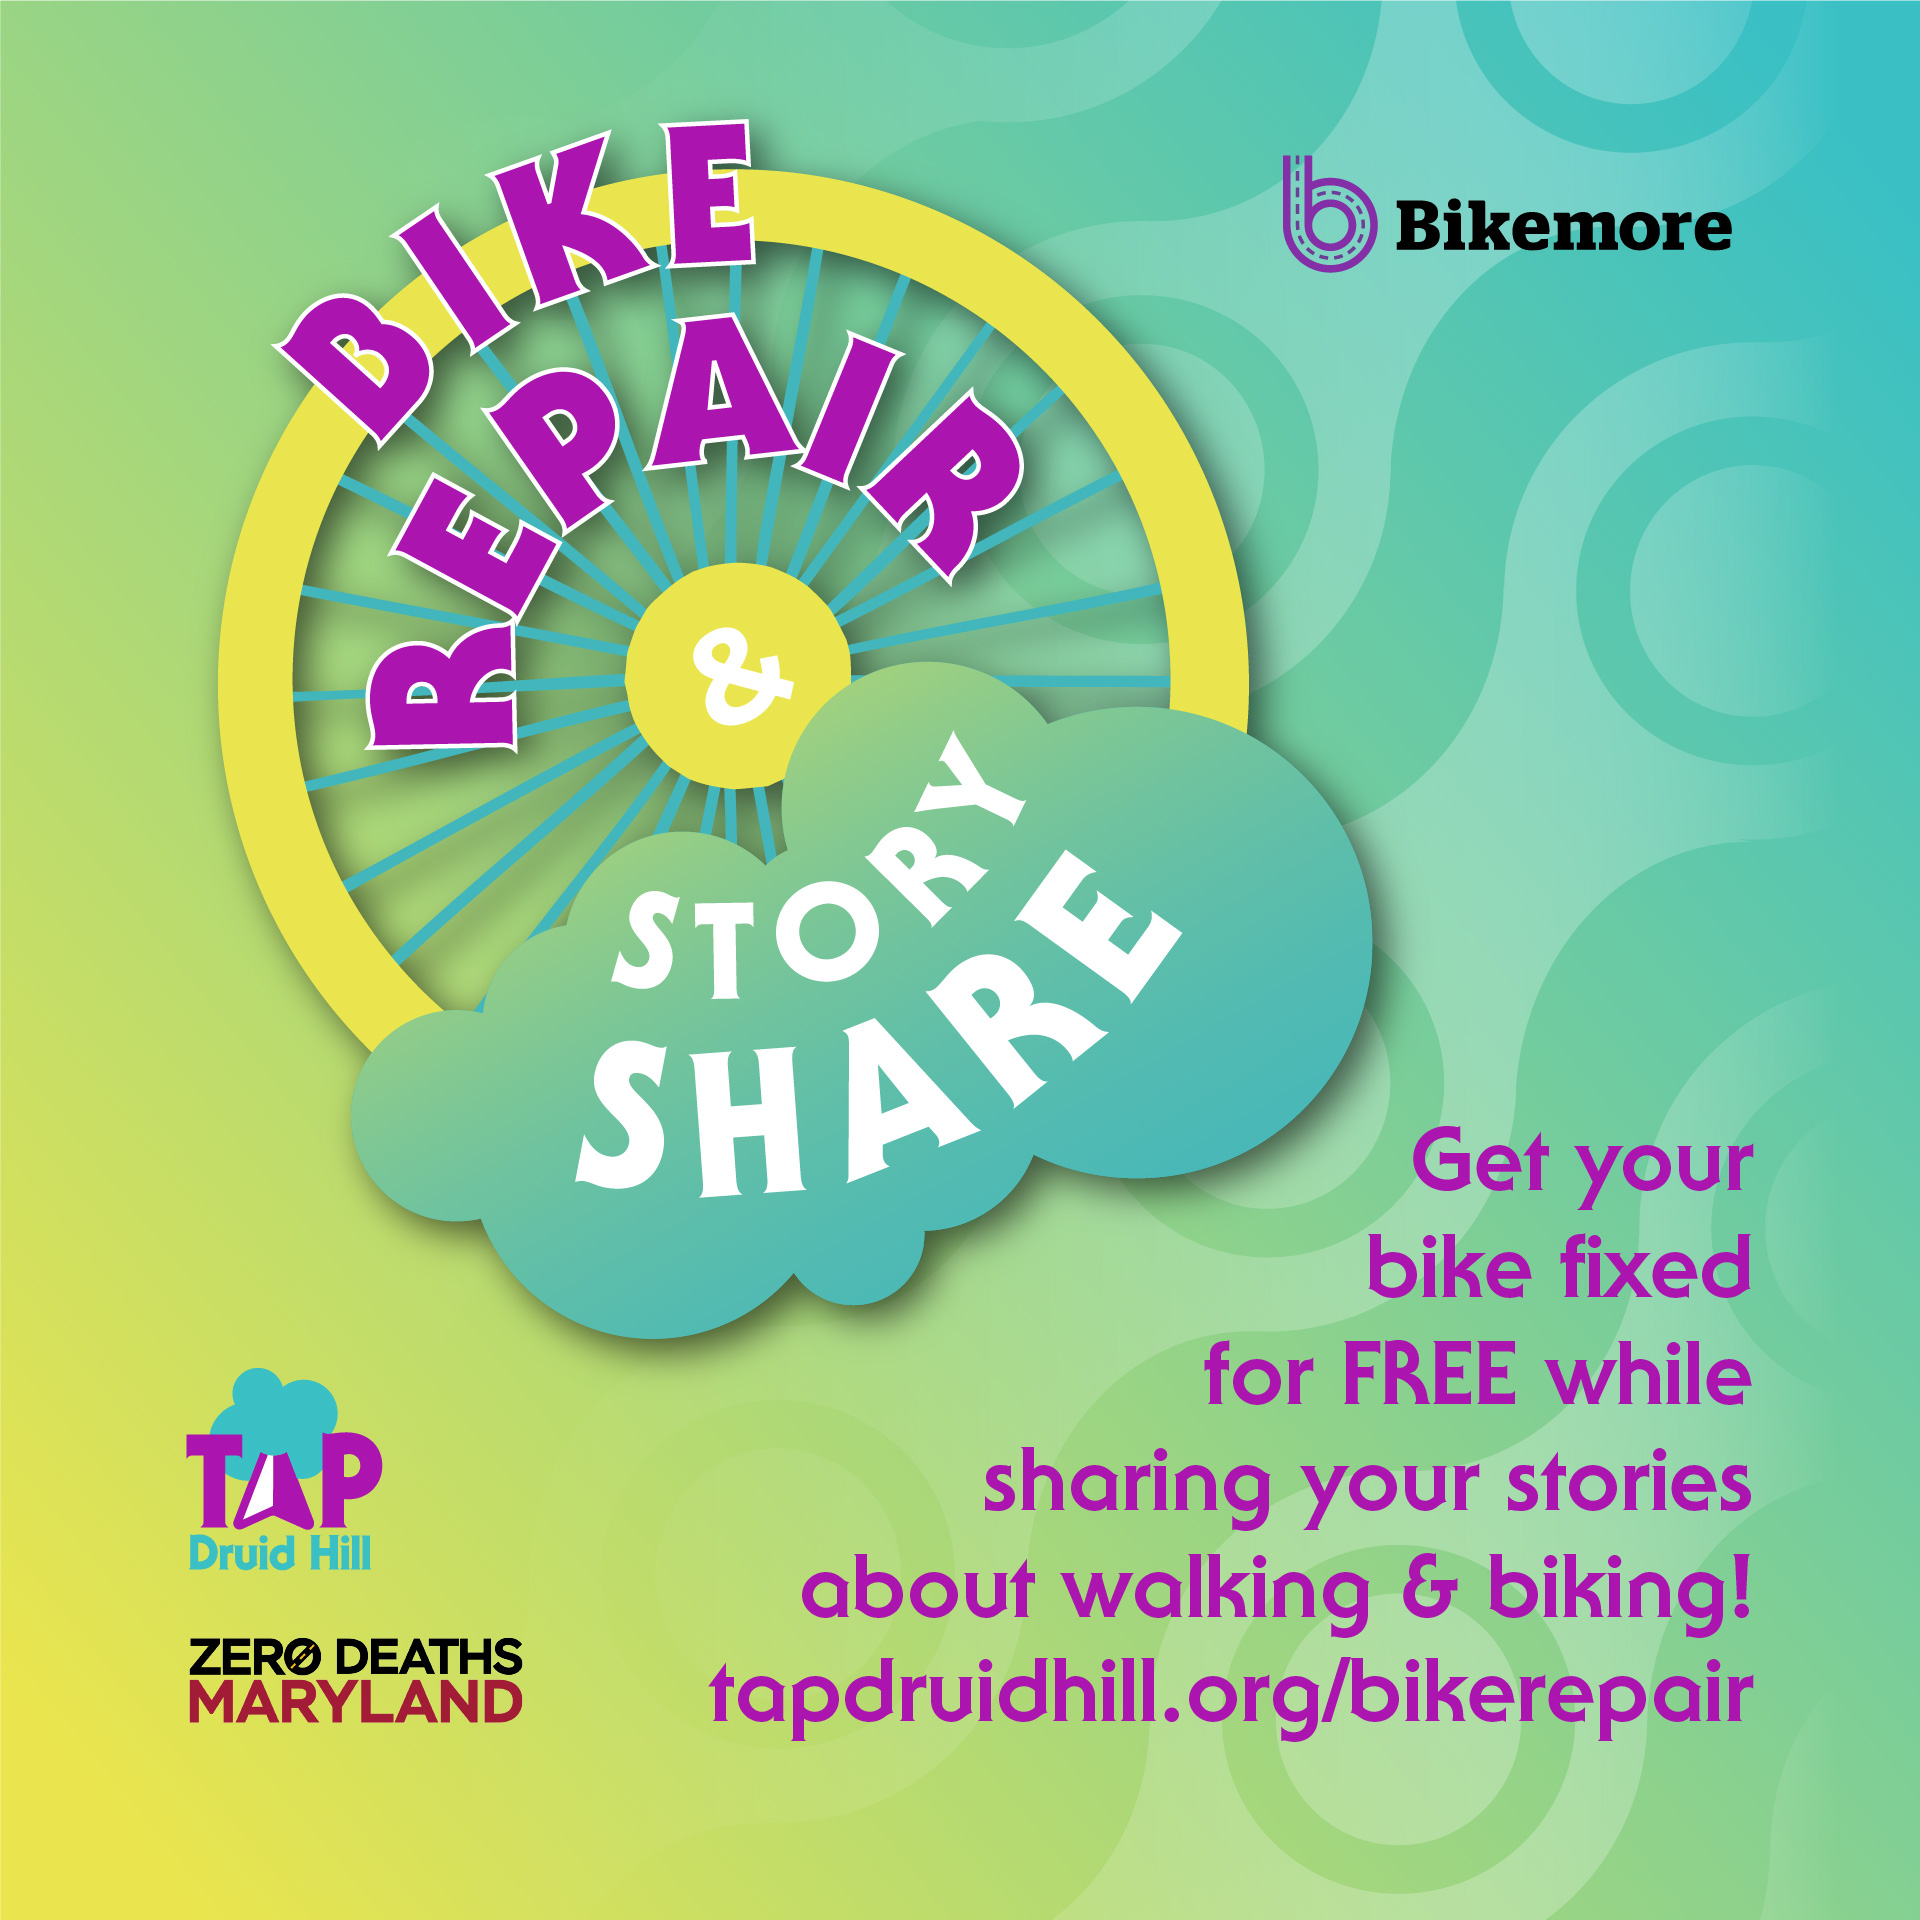 Bike Repair & Story Share banner inviting the reader to "Get your bike fixed for FREE while sharing your stories about walking & biking!"